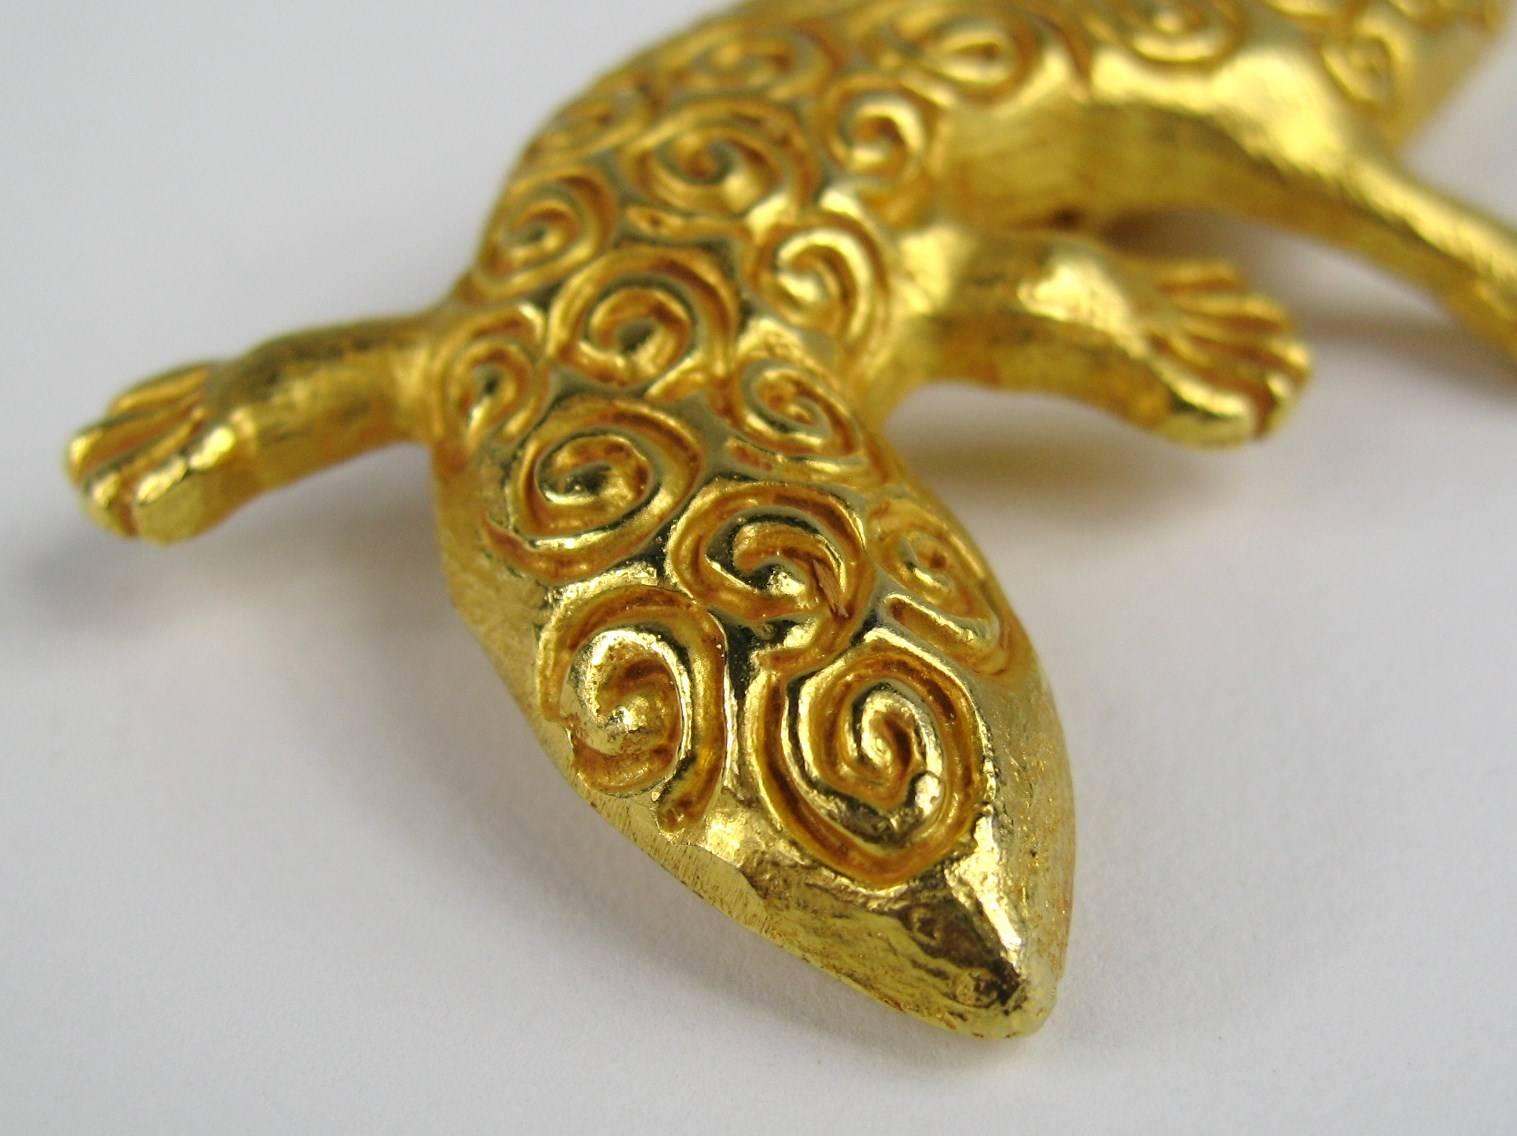 Dominique Aurientis Gold Gilt Lizard Brooch. It Measures 3.70 in x 1.50 in. This French jewelry designer has a vast international customer base and is known throughout the world for her artisan-crafted intricate designs that are rich important